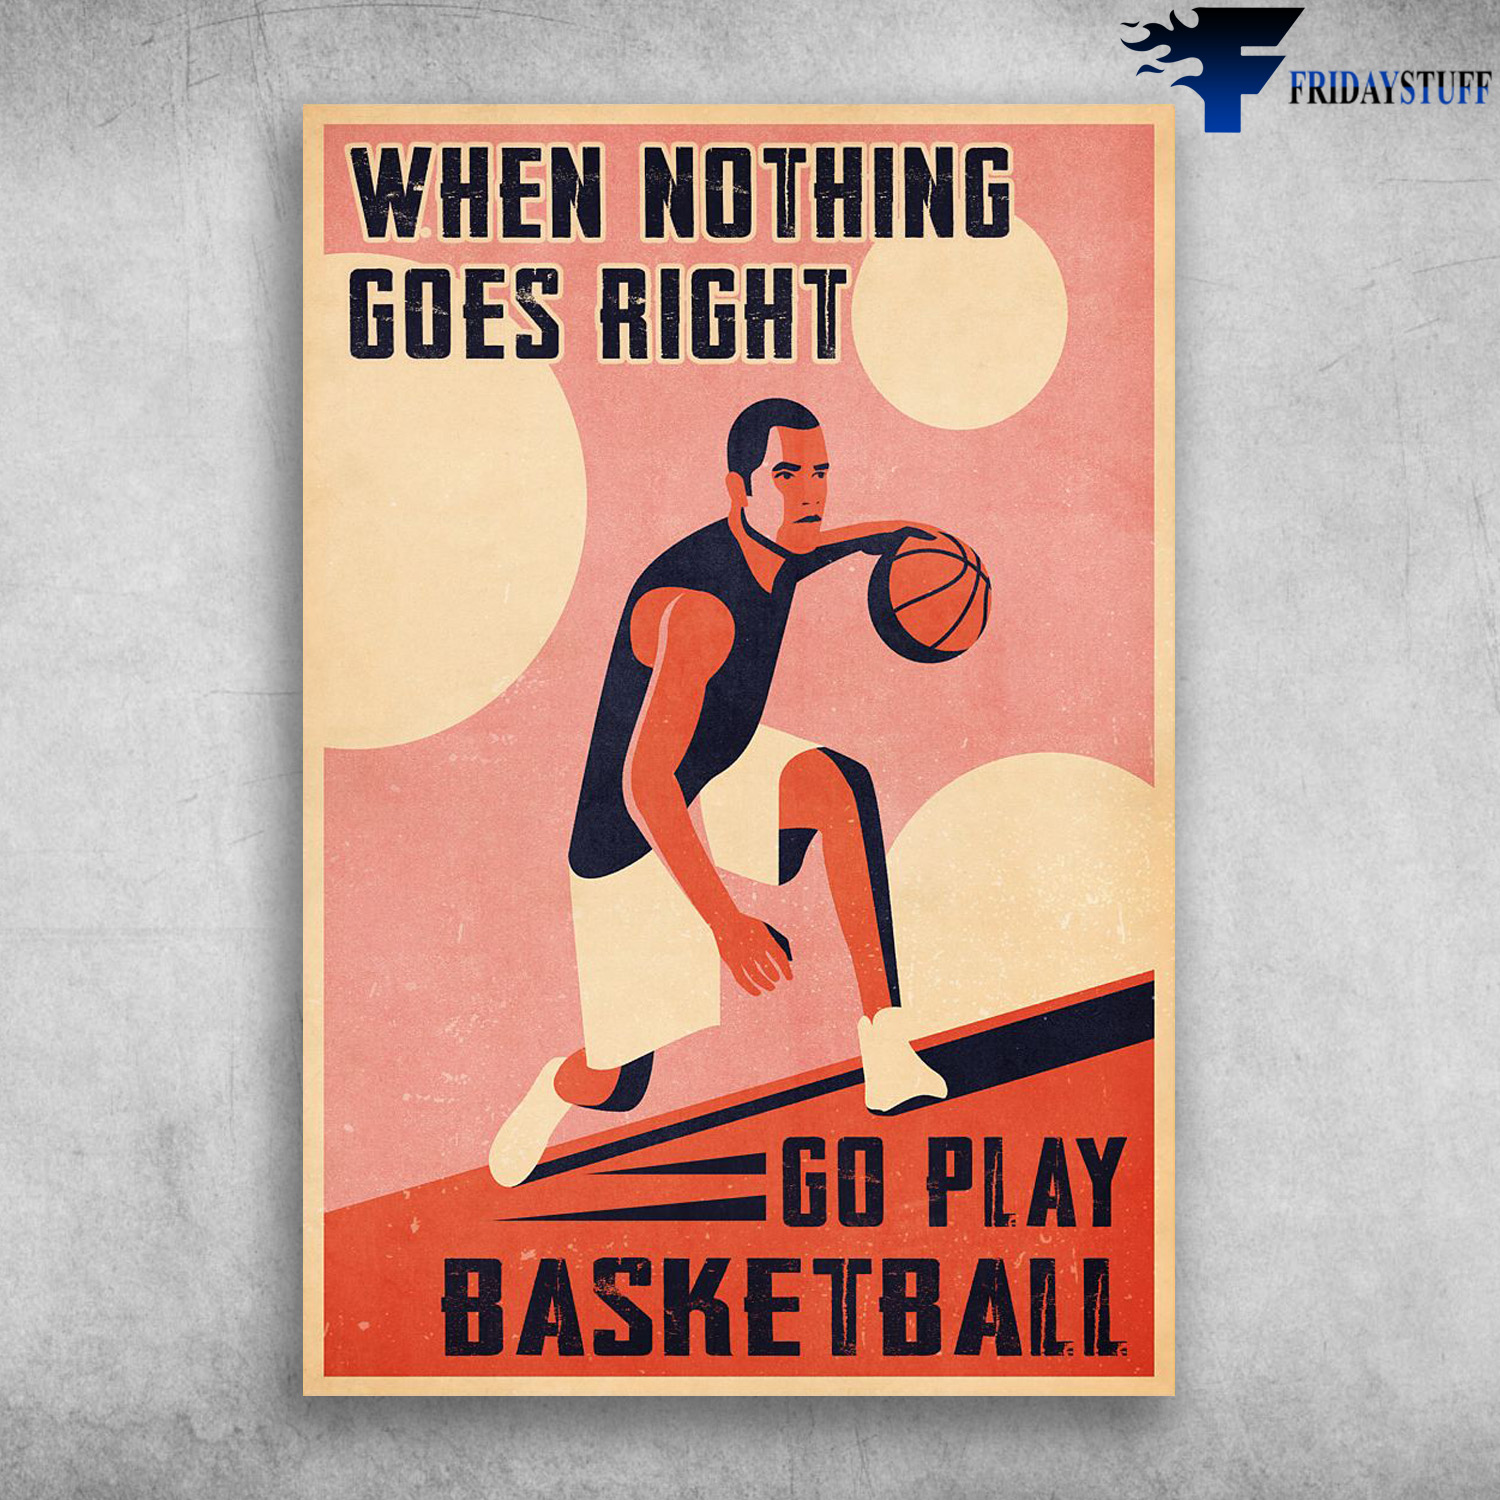 Basketball Player - When Nothing Goes Right, Go Play Basketball